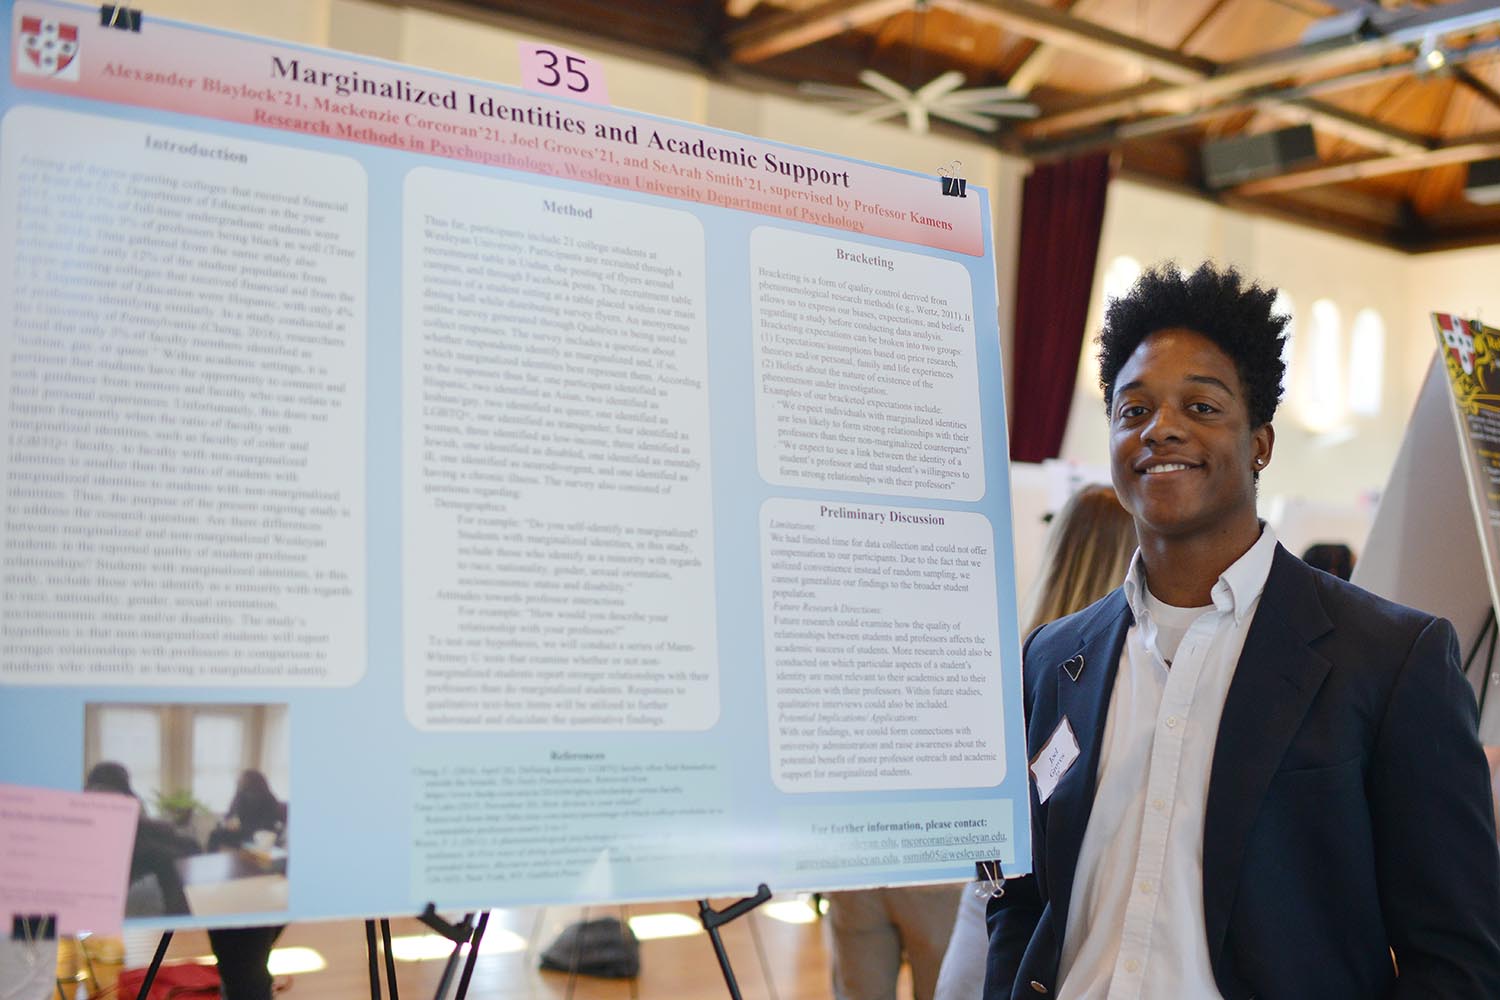 Joel Groves presented his group's poster titled "Marginalized Identities and Academic Support ." His advisor is Sarah Kamens. 